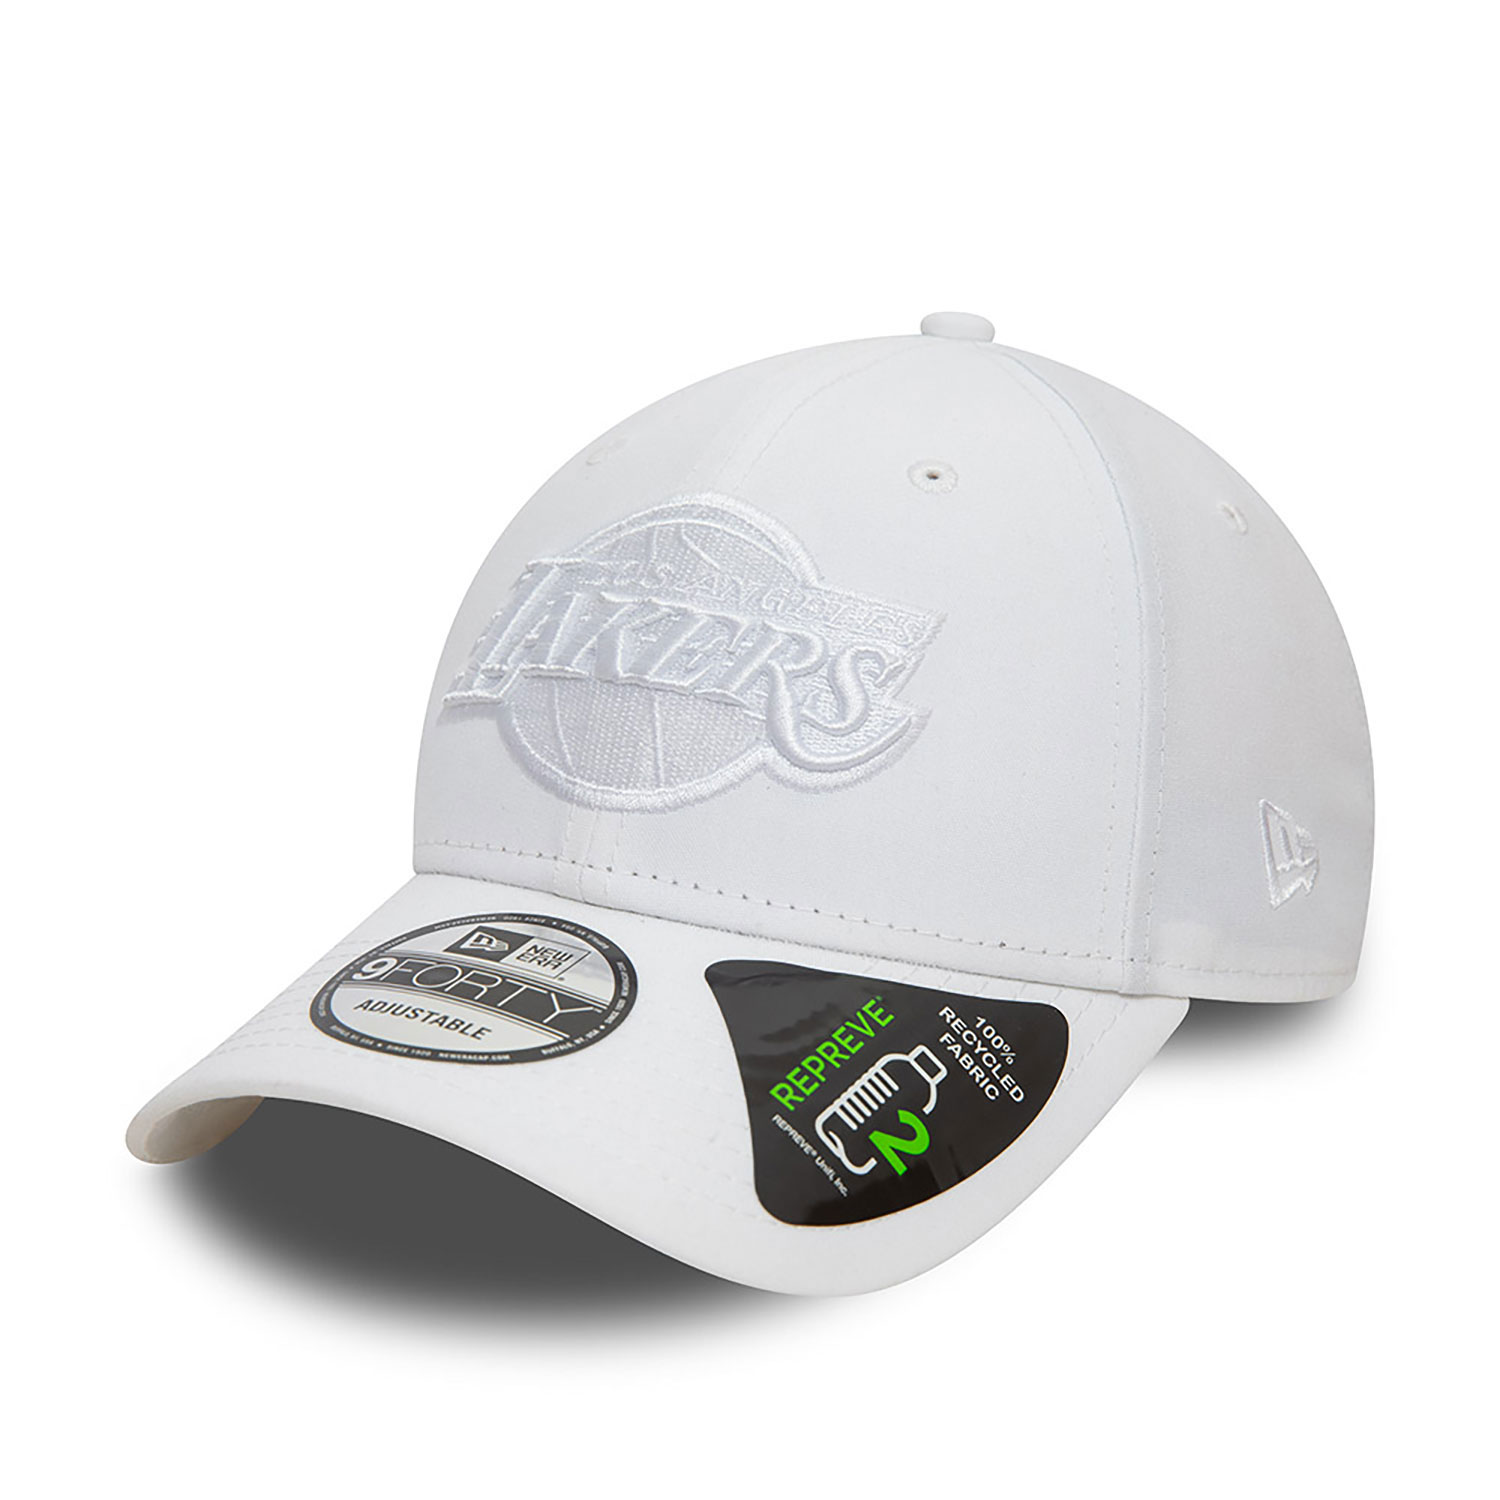 LA Lakers Repreve Outline White 9FORTY Adjustable Cap